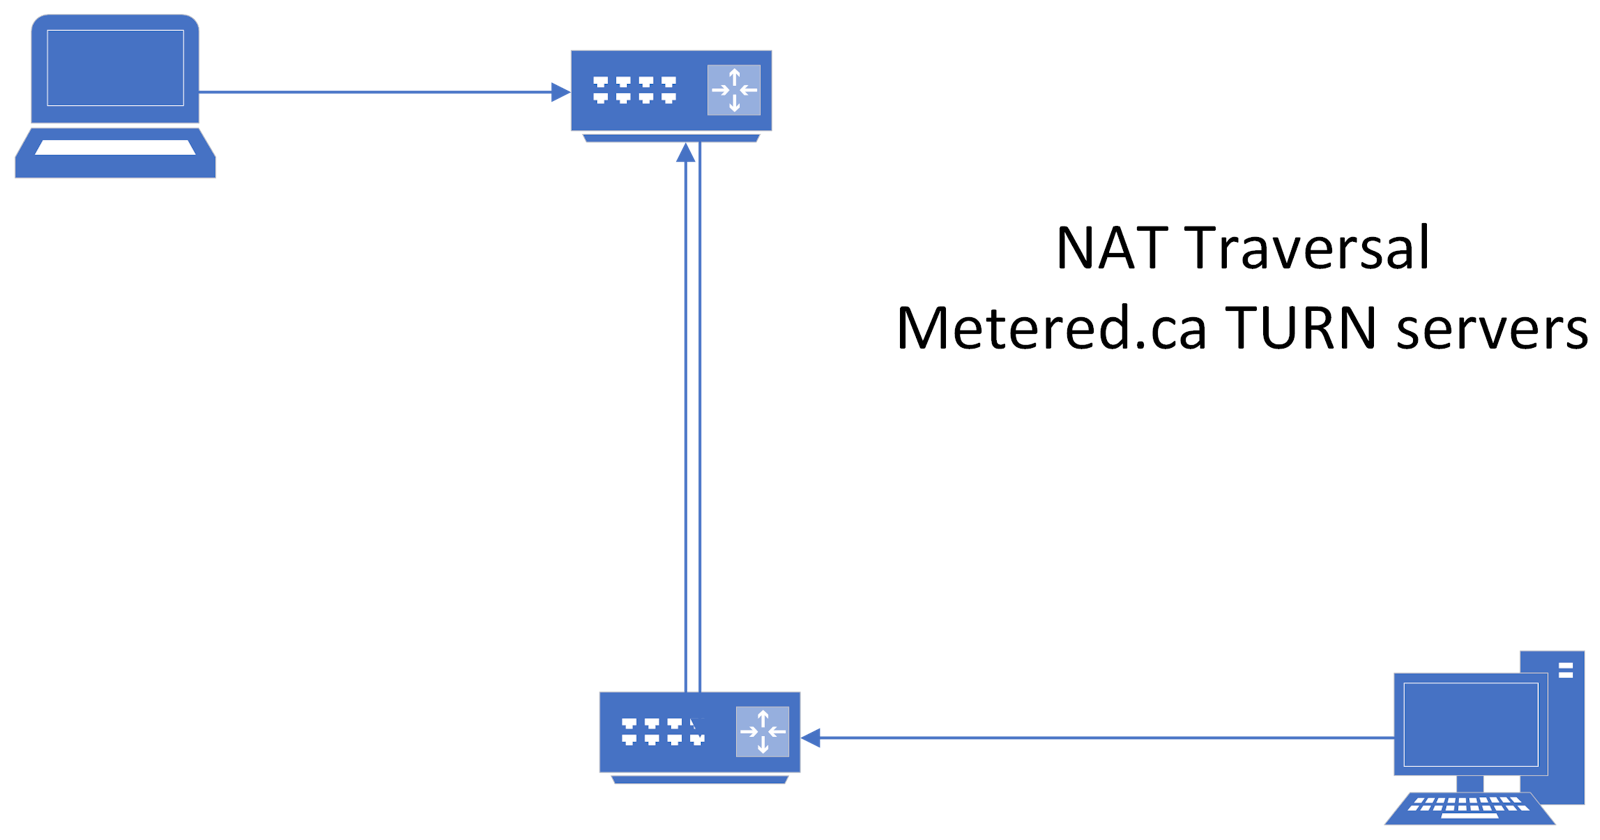 NAT traversal: How does it work?